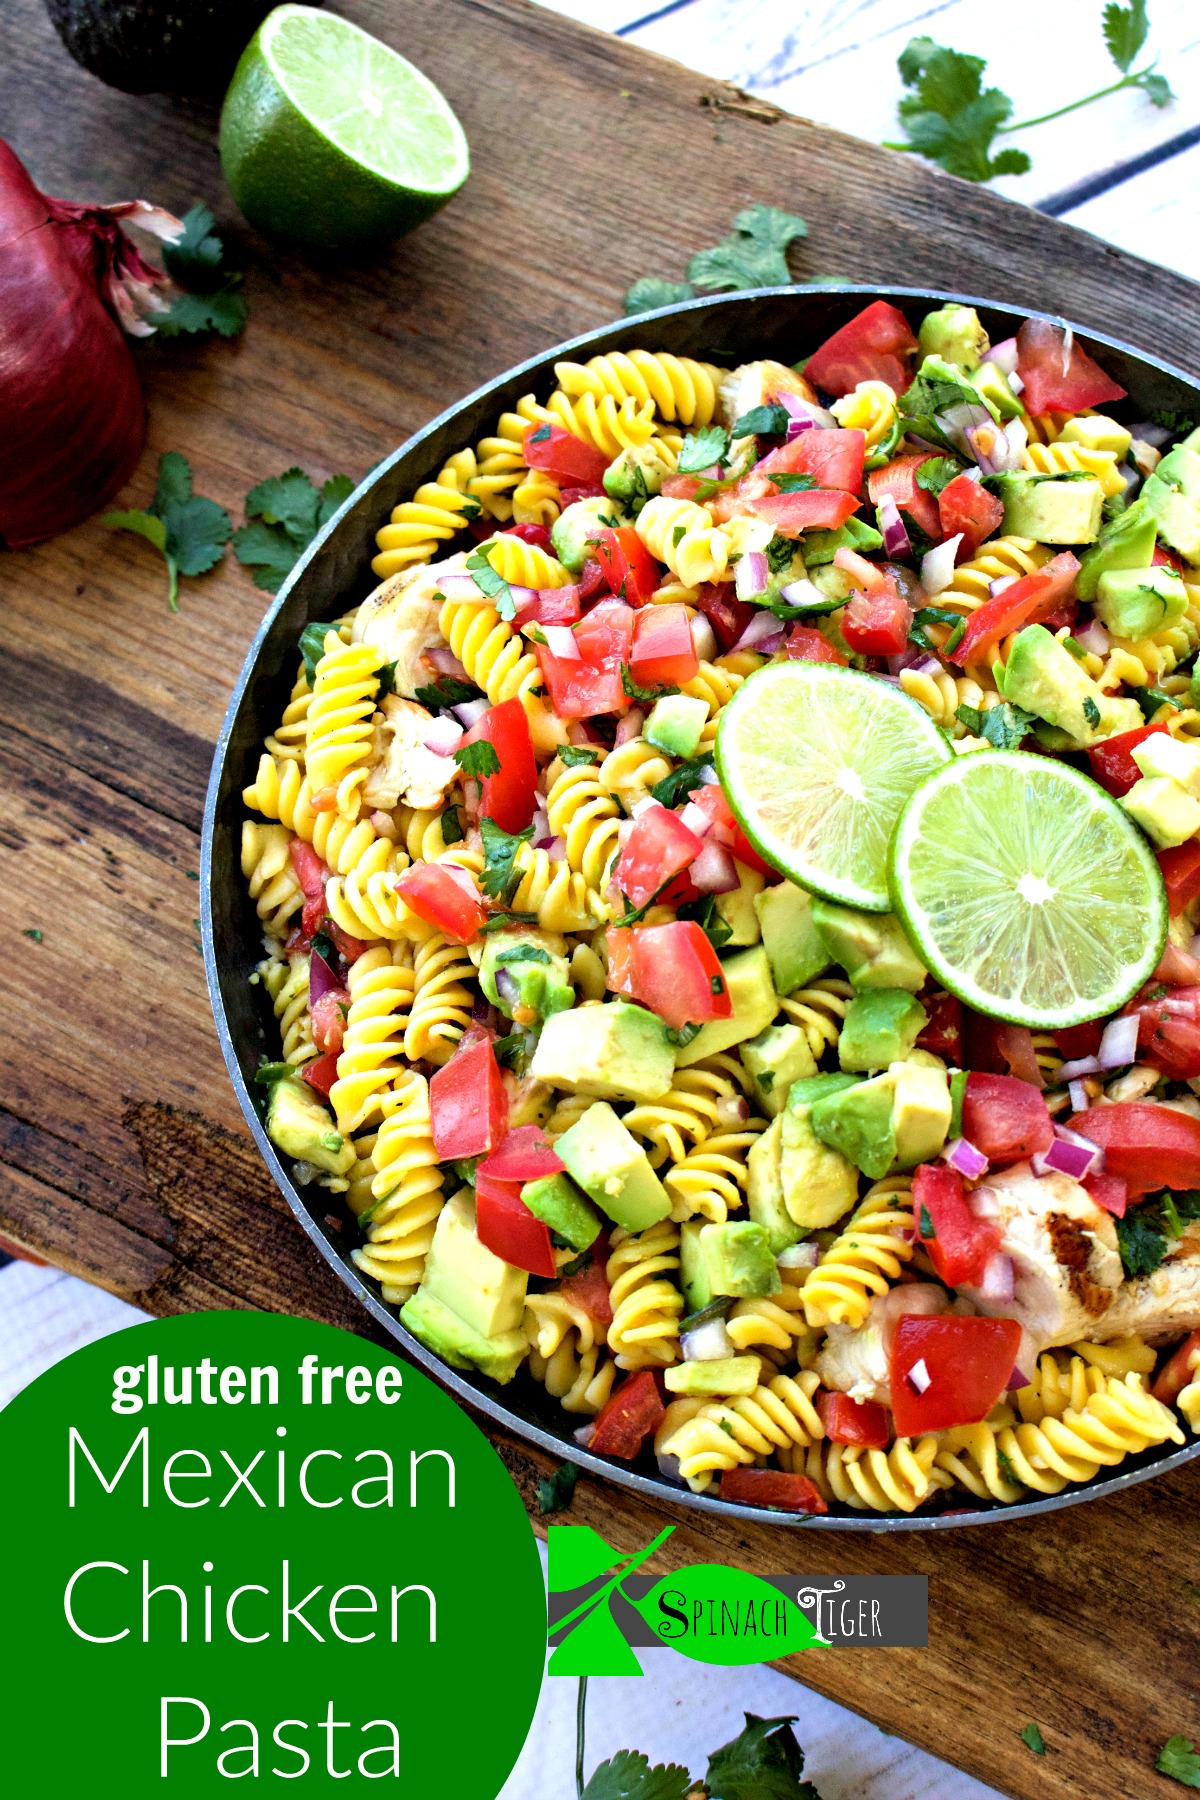 Mexican Chicken Pasta with Avocado from Spinach Tiger